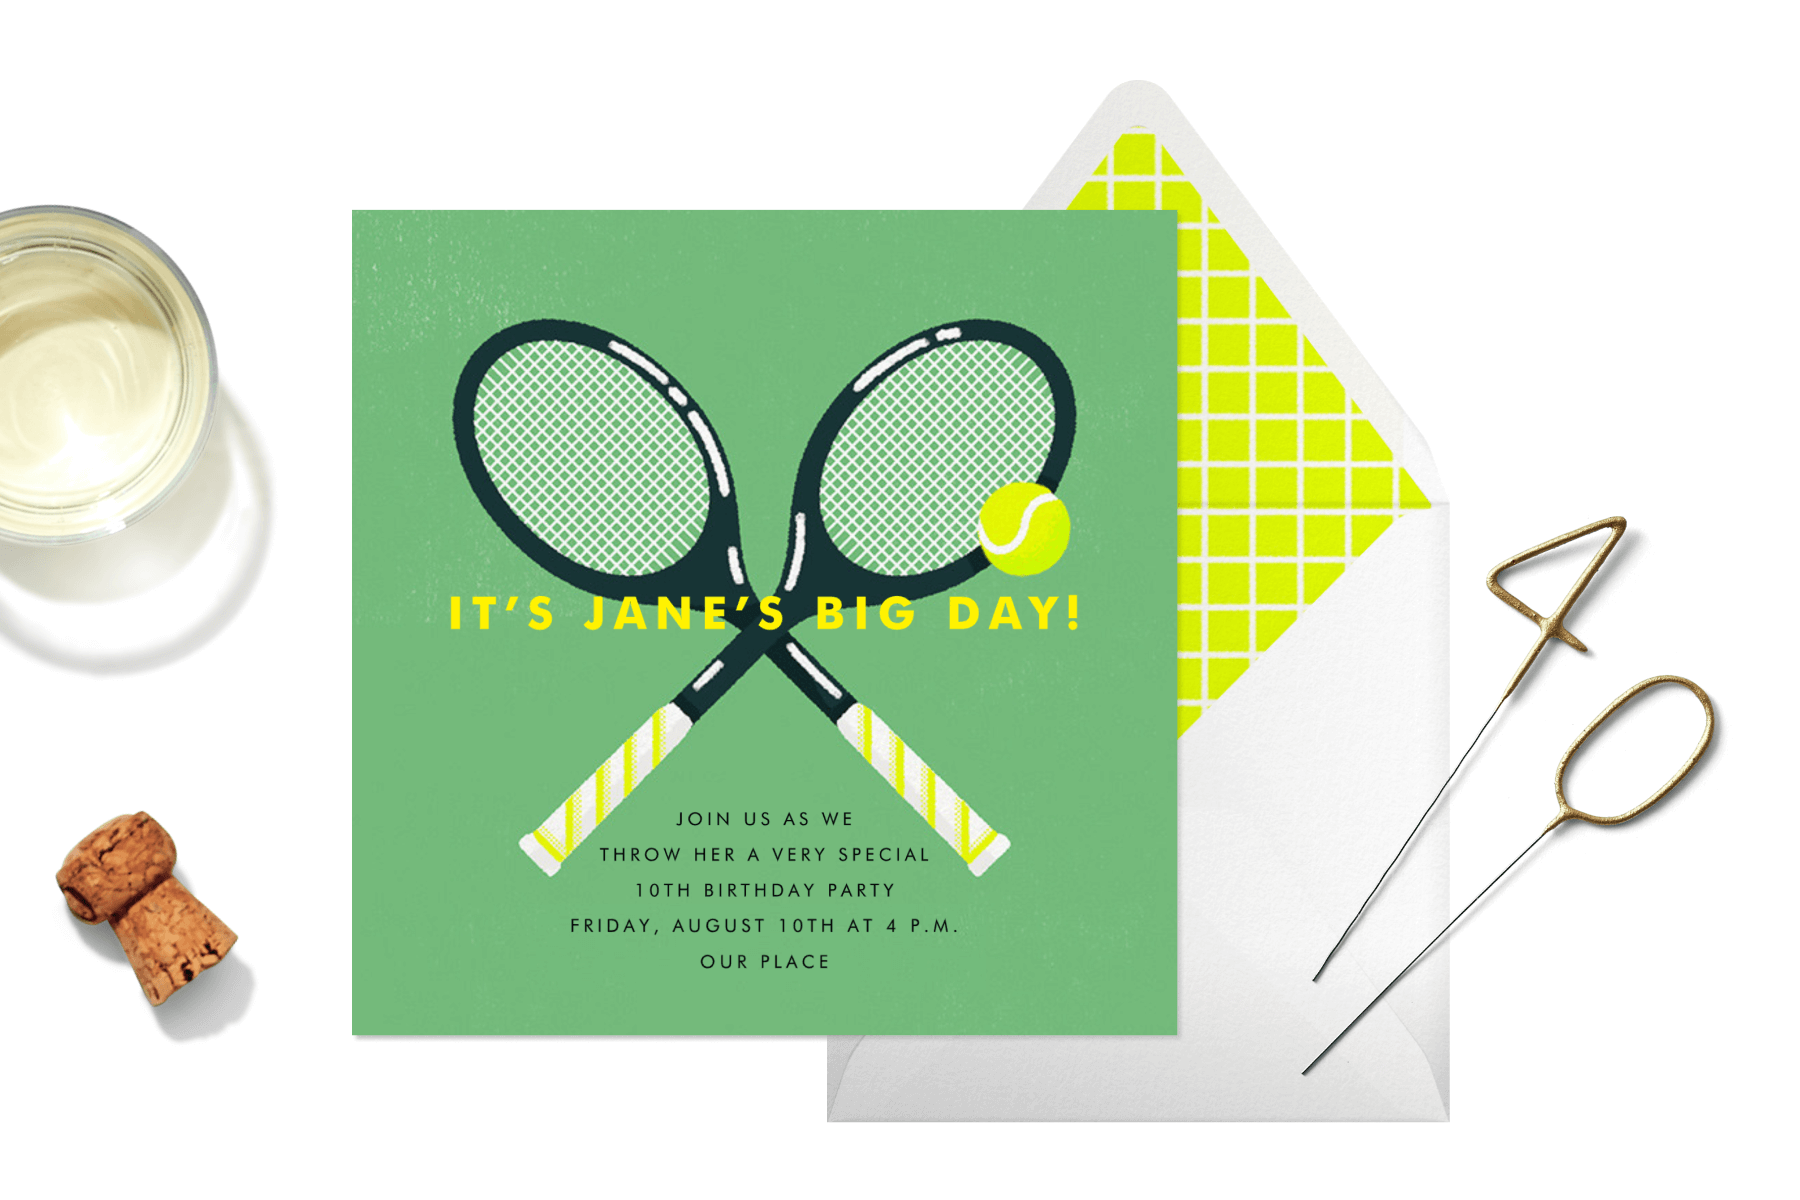 A green invitation with tennis rackets and ball, next to 4-0 cake toppers, a cork, an envelope, and a drink.